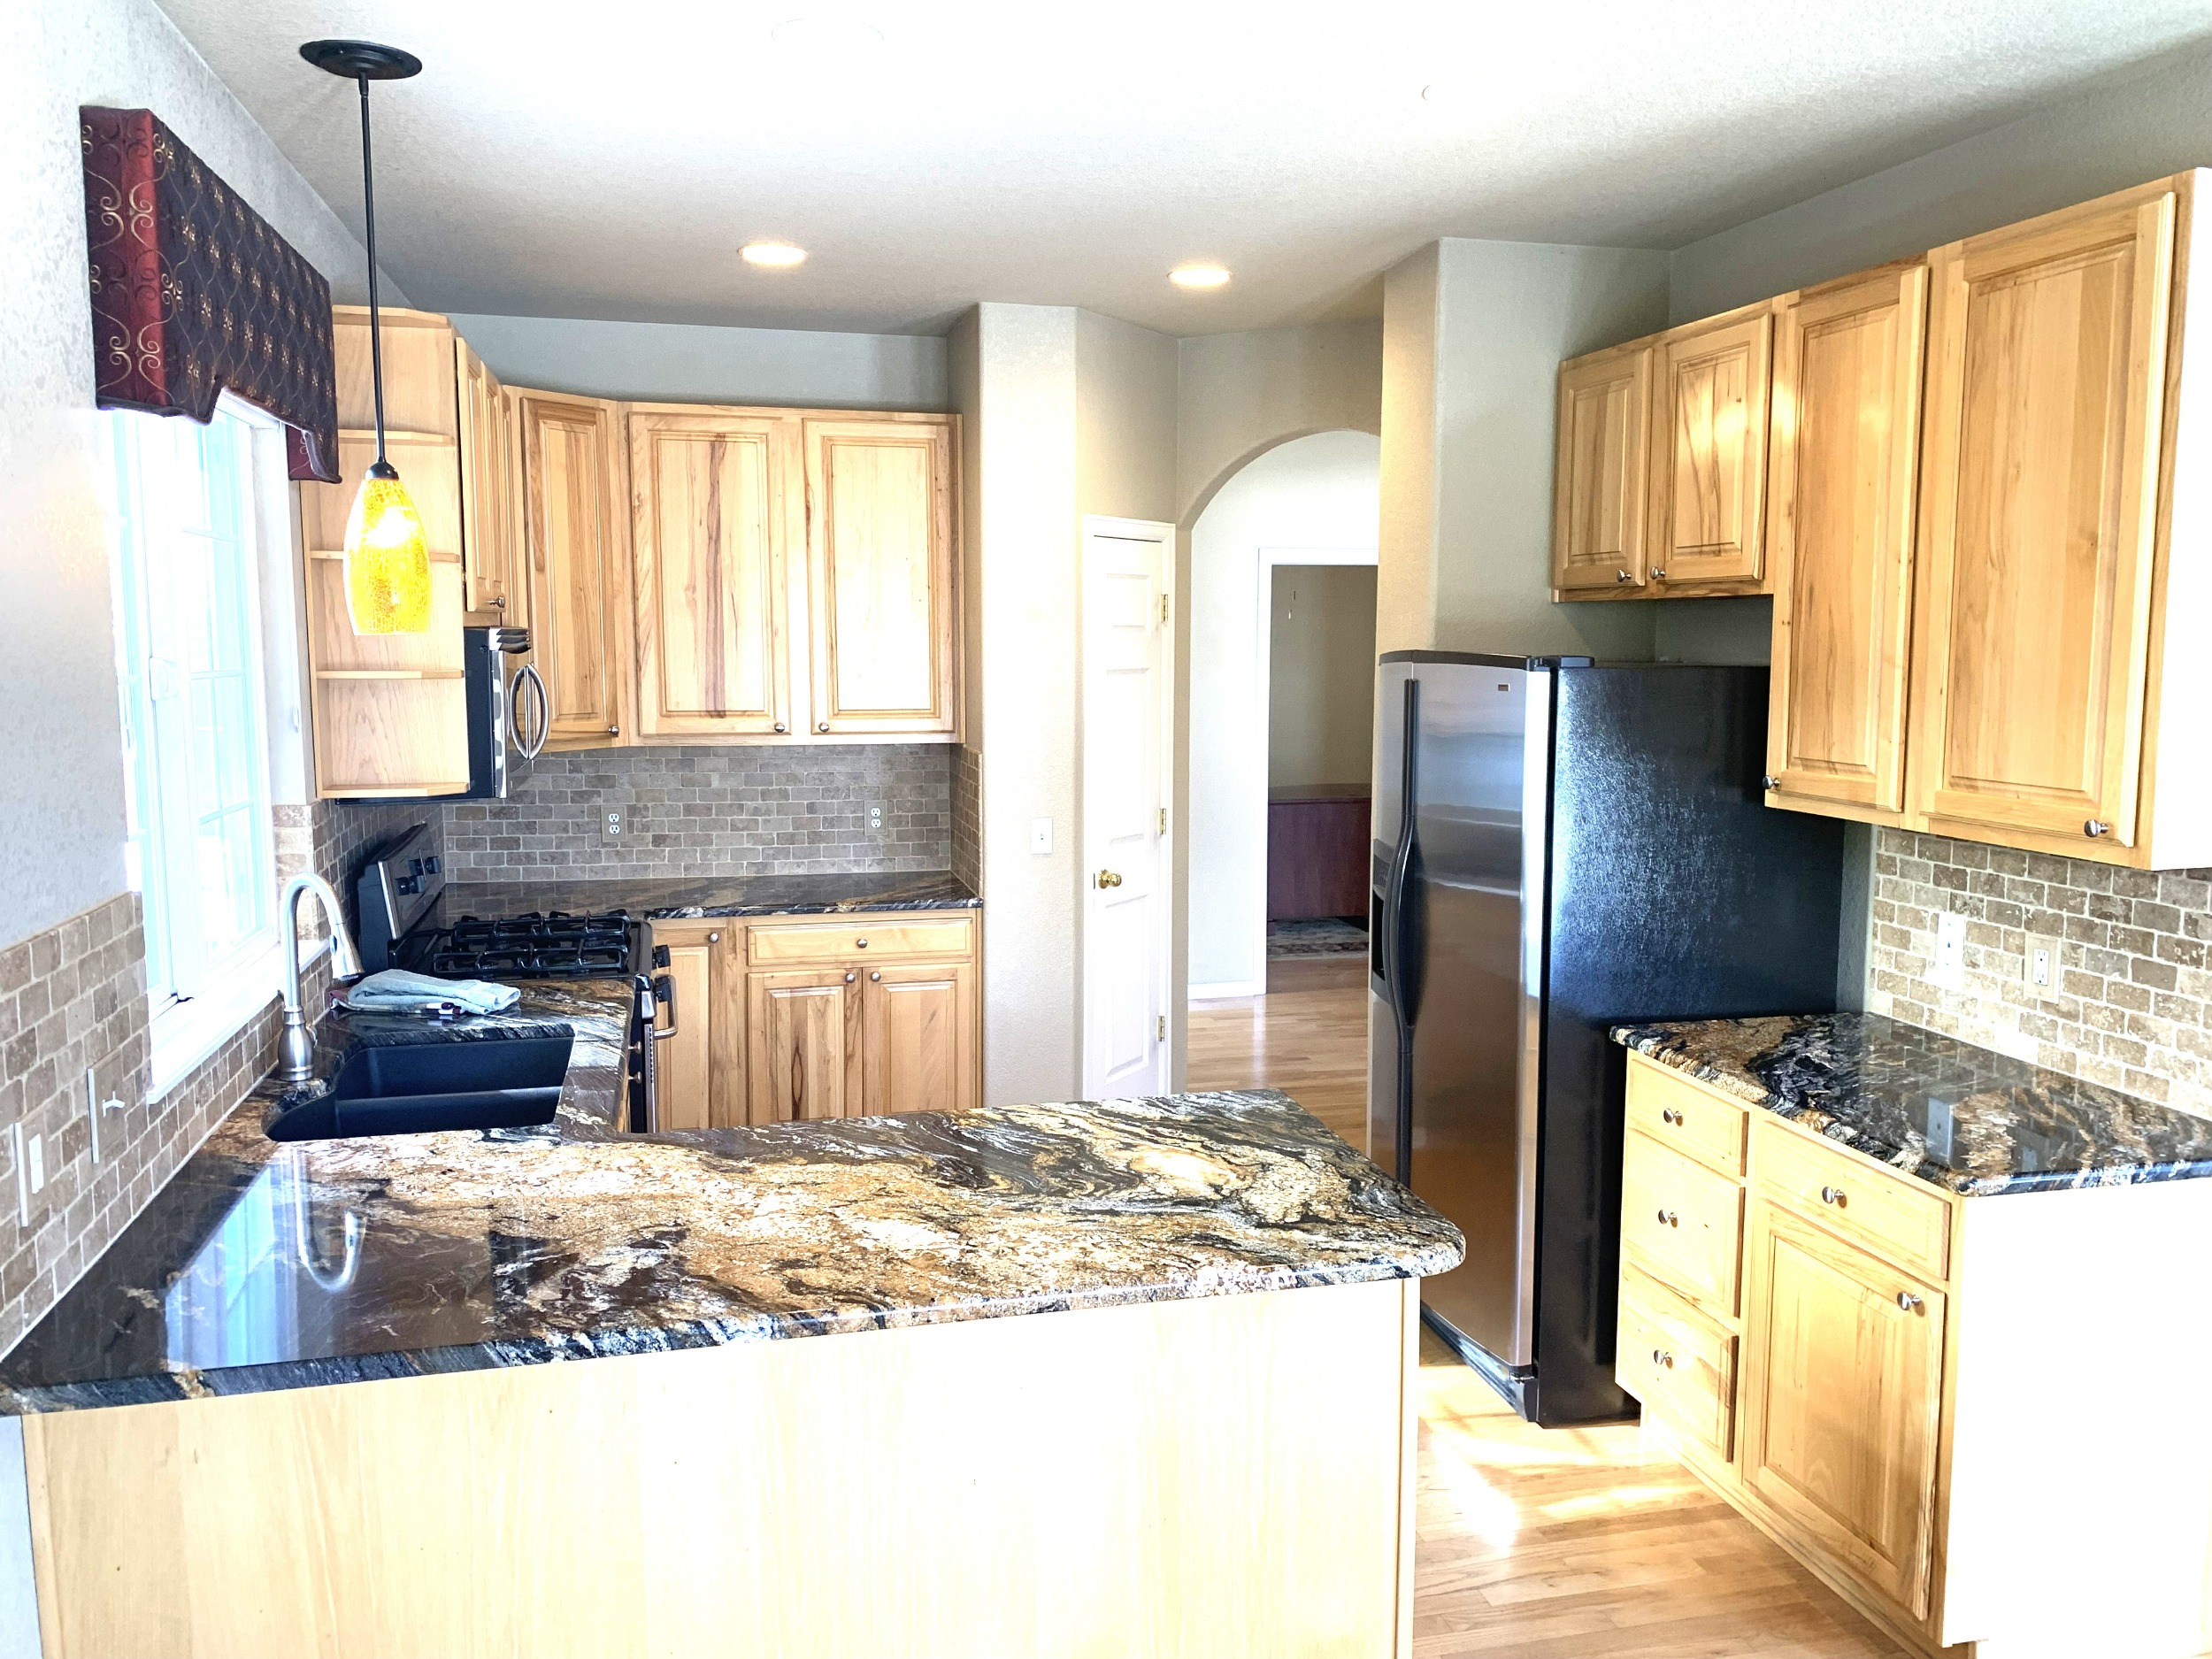 Granite Counters, Stainless Appliances, Pantry